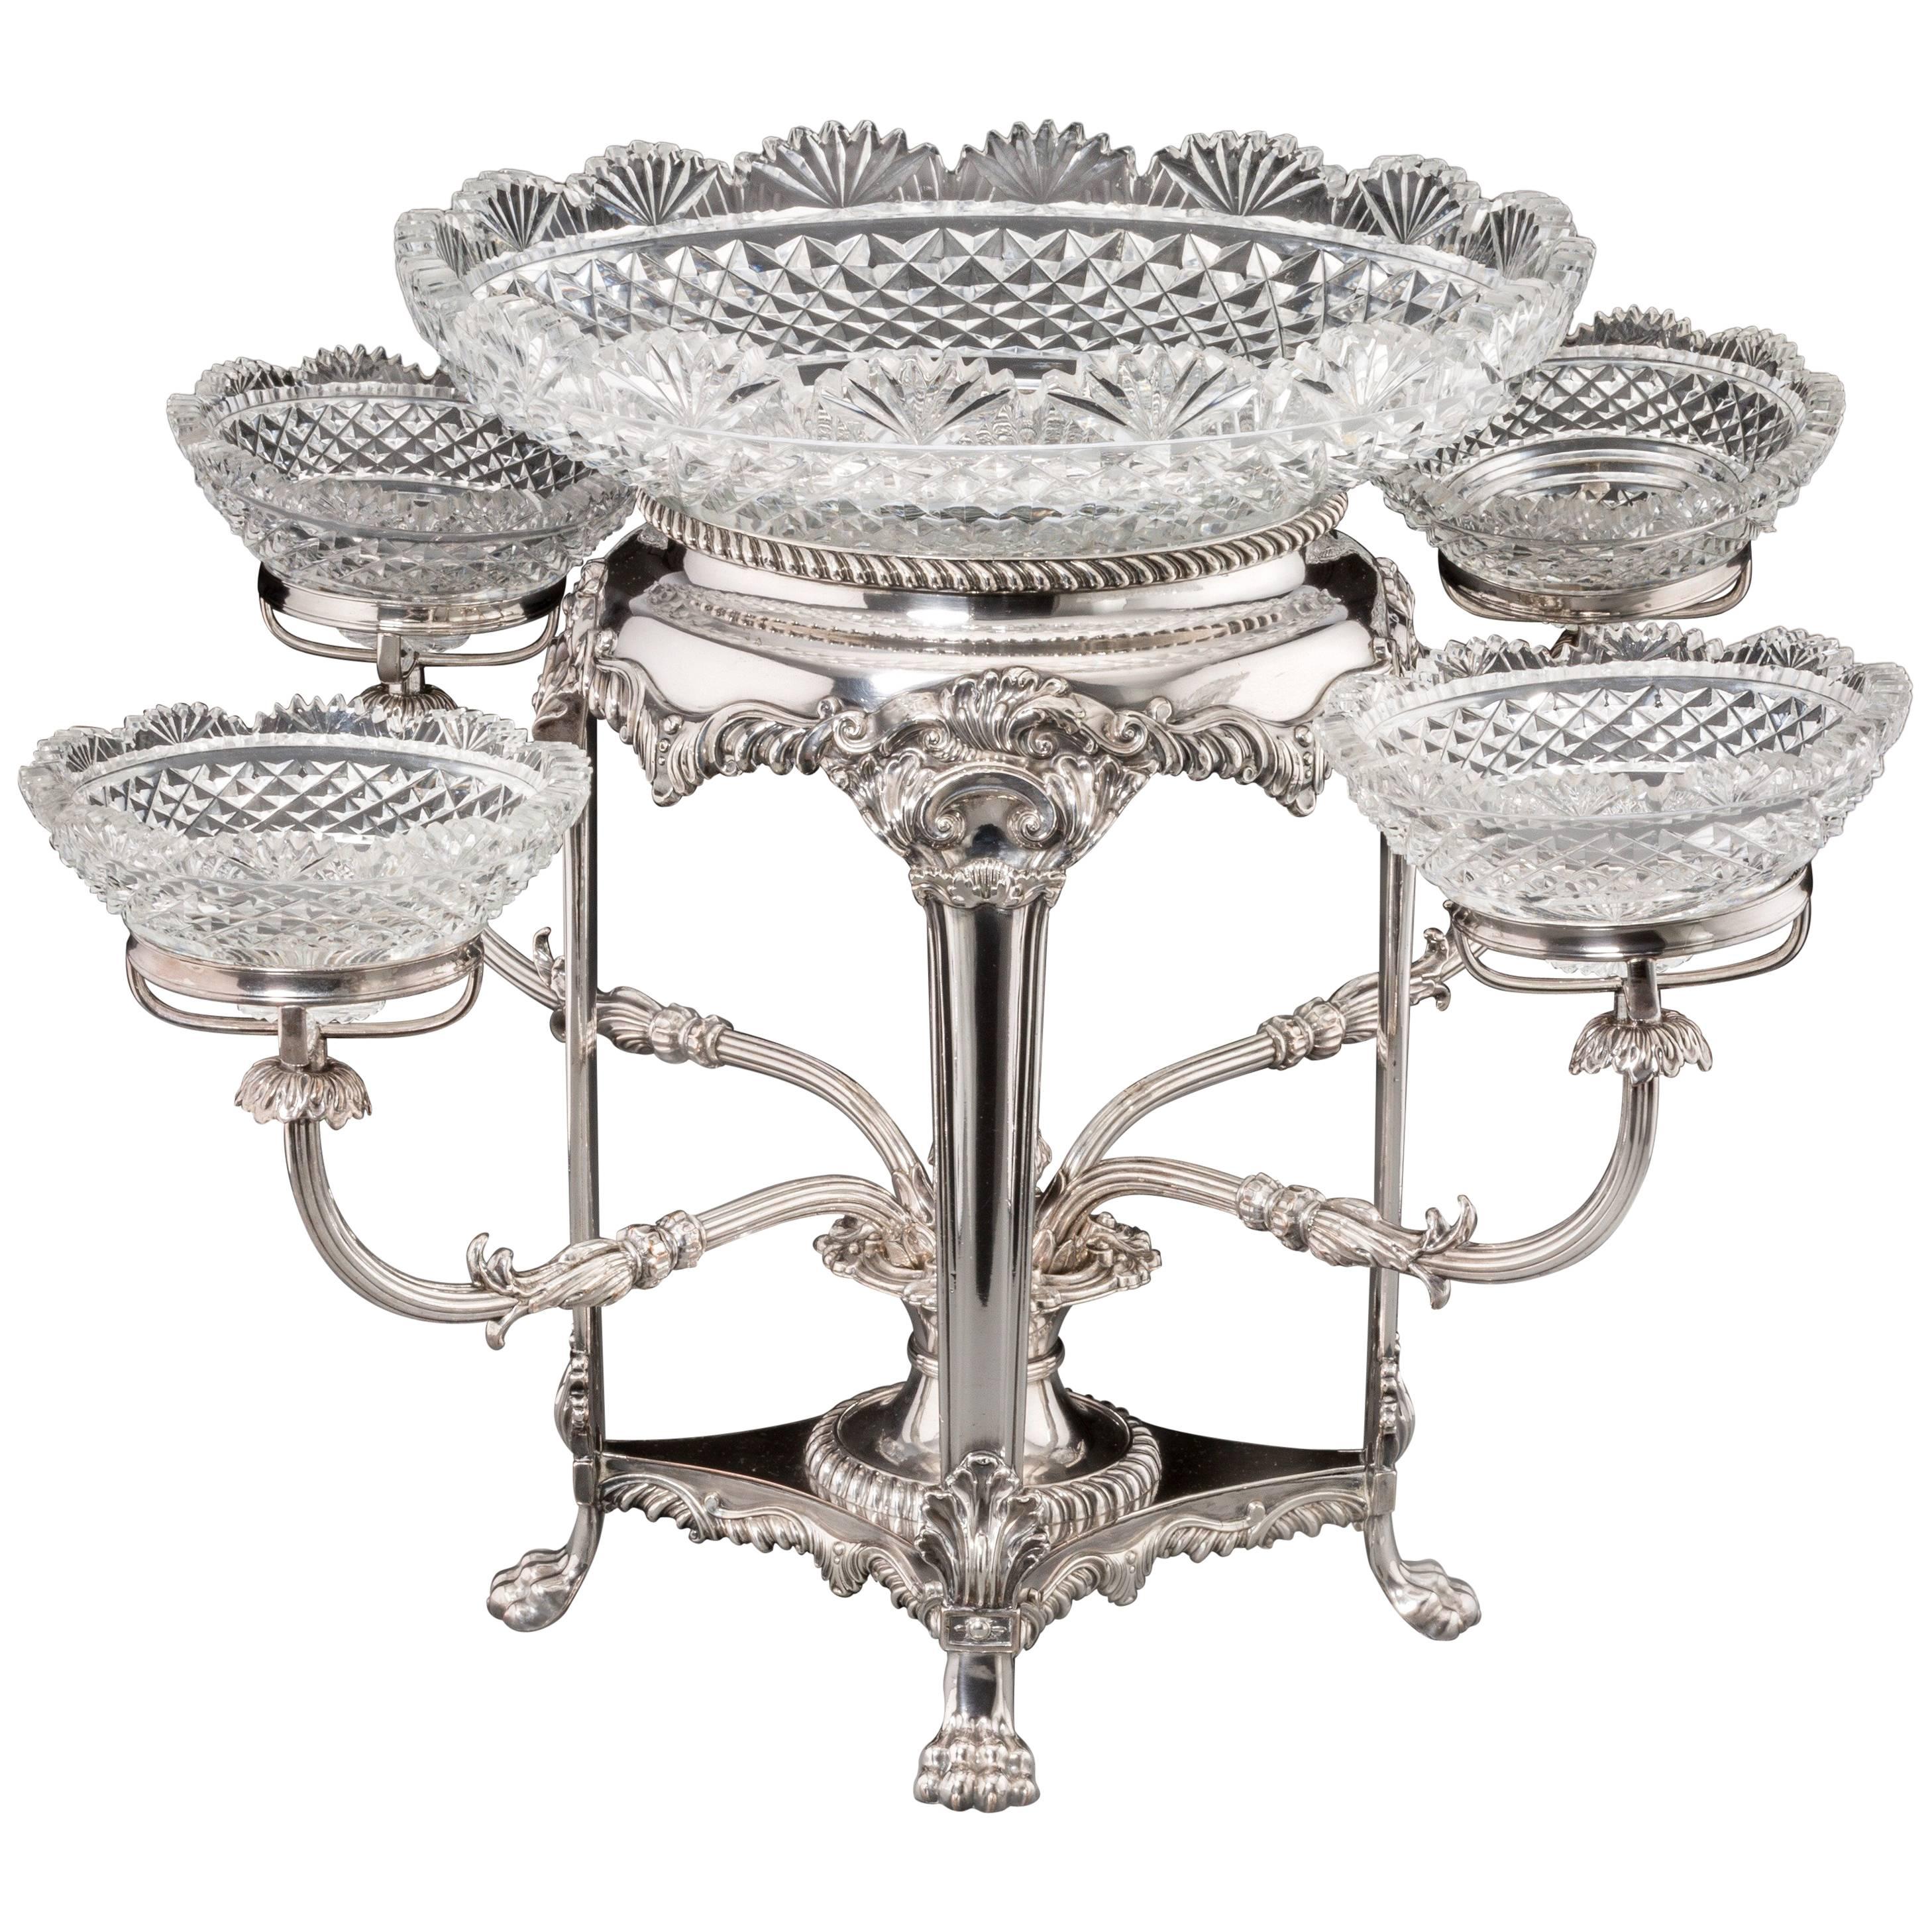 19th Century English George III Style Silver-Plated and Cut-Glass Epergne